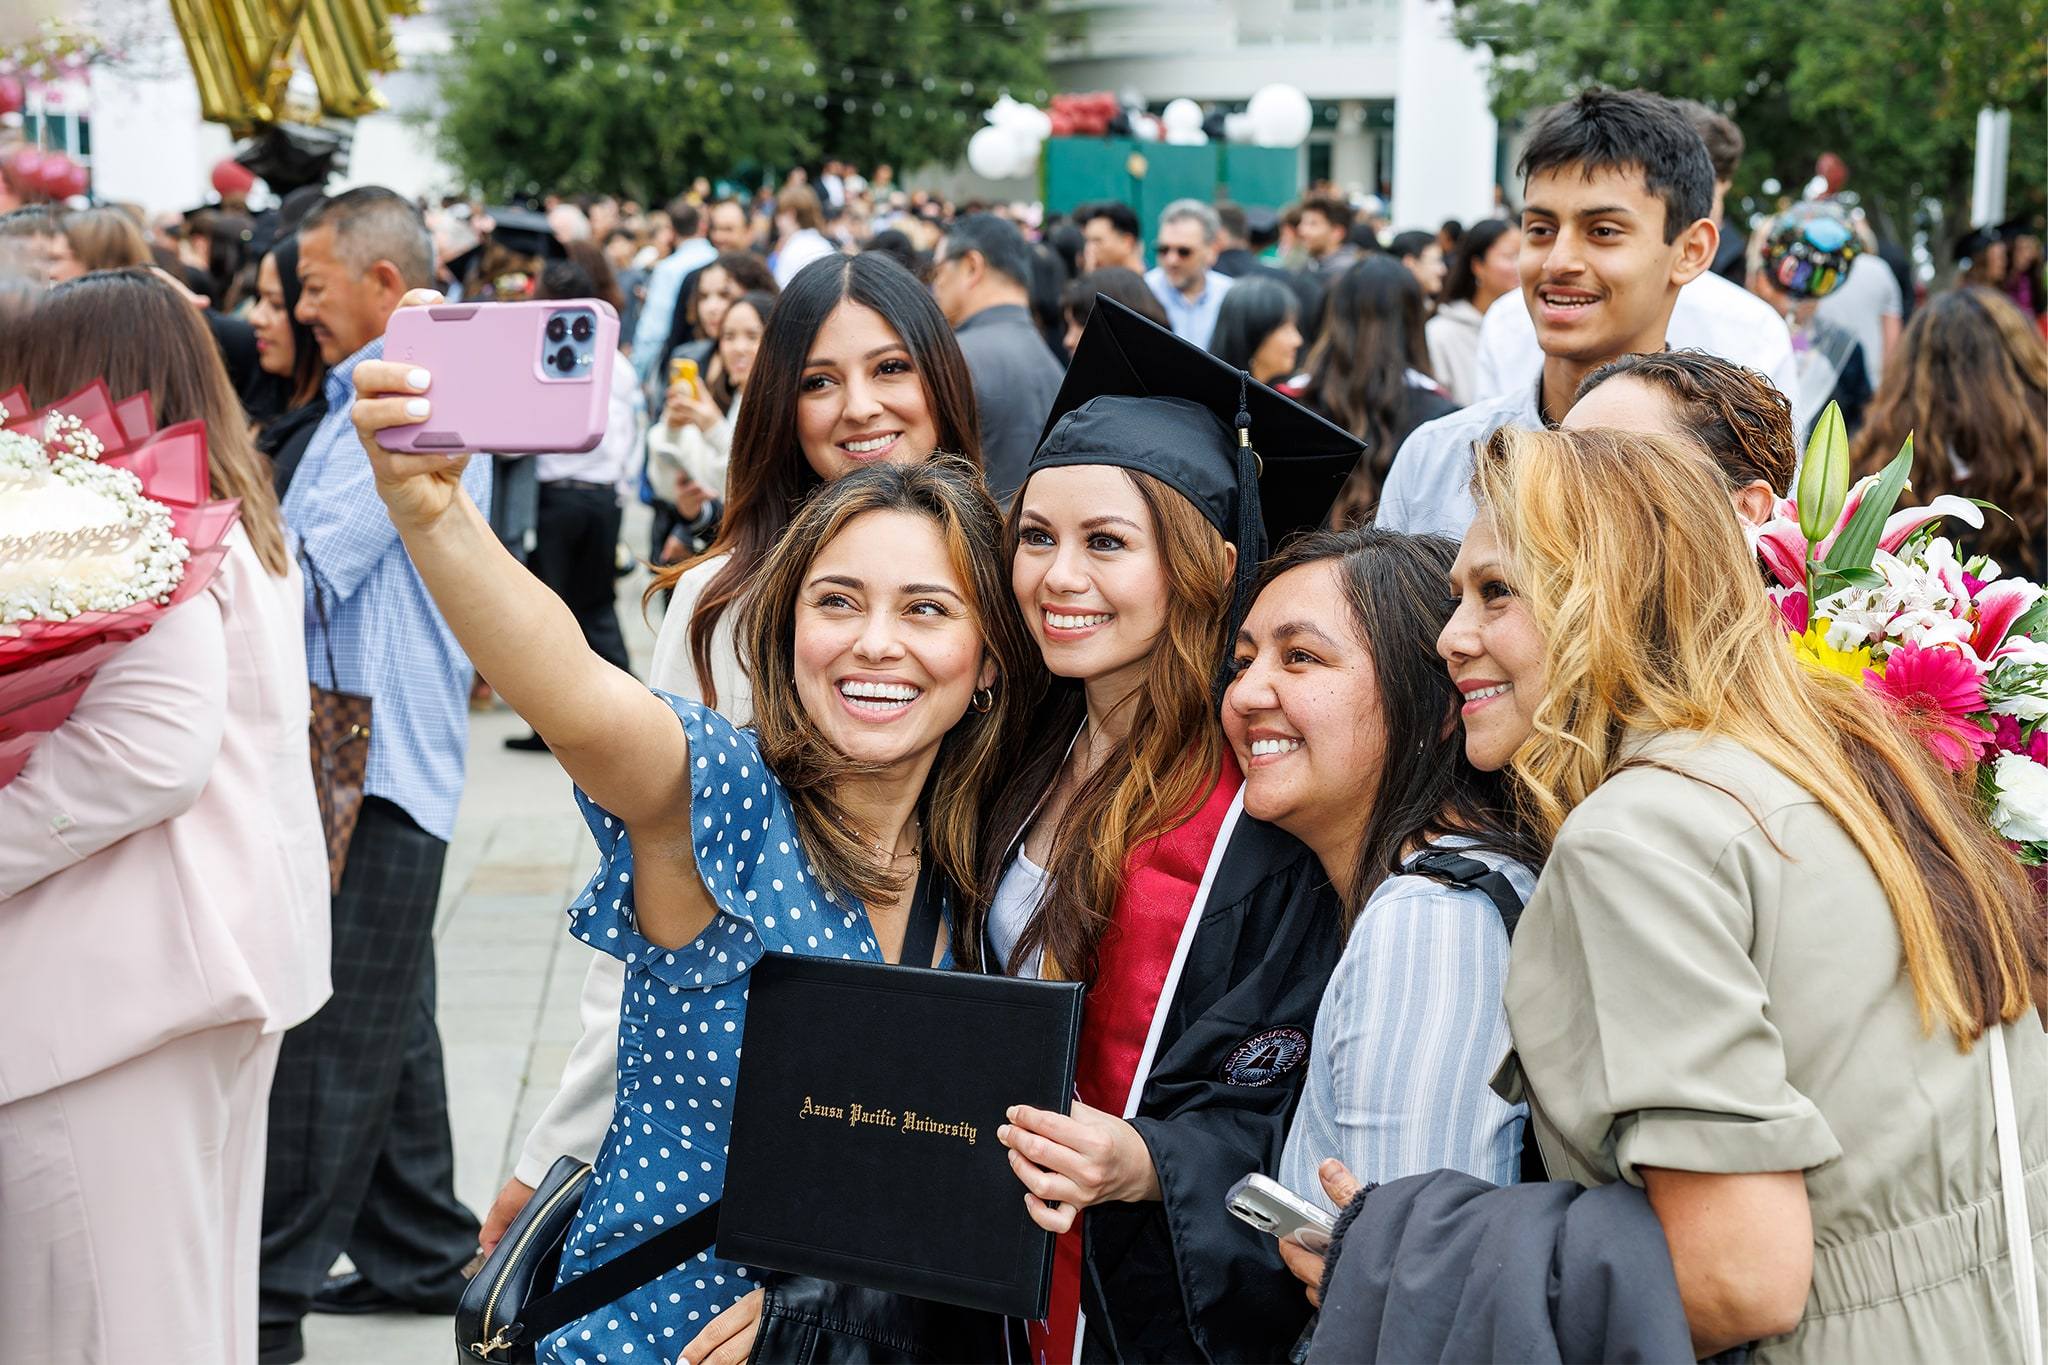 apu students and family taking a selfie and celebrating graduation